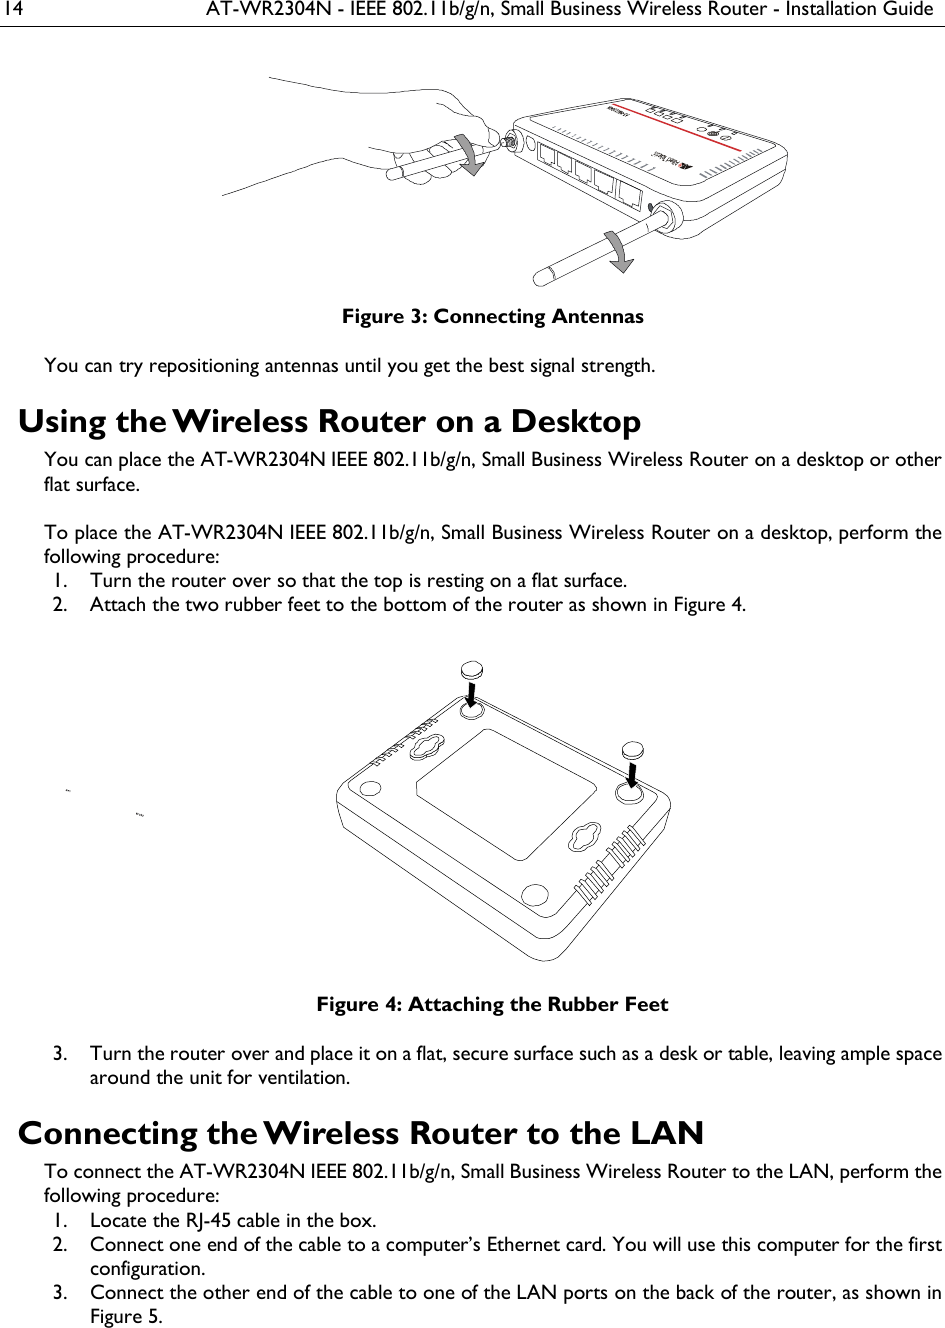 14  AT-WR2304N - IEEE 802.11b/g/n, Small Business Wireless Router - Installation Guide  Figure 3: Connecting Antennas You can try repositioning antennas until you get the best signal strength. Using the Wireless Router on a Desktop You can place the AT-WR2304N IEEE 802.11b/g/n, Small Business Wireless Router on a desktop or other flat surface.  To place the AT-WR2304N IEEE 802.11b/g/n, Small Business Wireless Router on a desktop, perform the following procedure:  Turn the router over so that the top is resting on a flat surface. 1. Attach the two rubber feet to the bottom of the router as shown in Figure 4. 2. Figure 4: Attaching the Rubber Feet  Turn the router over and place it on a flat, secure surface such as a desk or table, leaving ample space 3.around the unit for ventilation. Connecting the Wireless Router to the LAN To connect the AT-WR2304N IEEE 802.11b/g/n, Small Business Wireless Router to the LAN, perform the following procedure:  Locate the RJ-45 cable in the box. 1. Connect one end of the cable to a computer’s Ethernet card. You will use this computer for the first 2.configuration.  Connect the other end of the cable to one of the LAN ports on the back of the router, as shown in  3.Figure 5.  